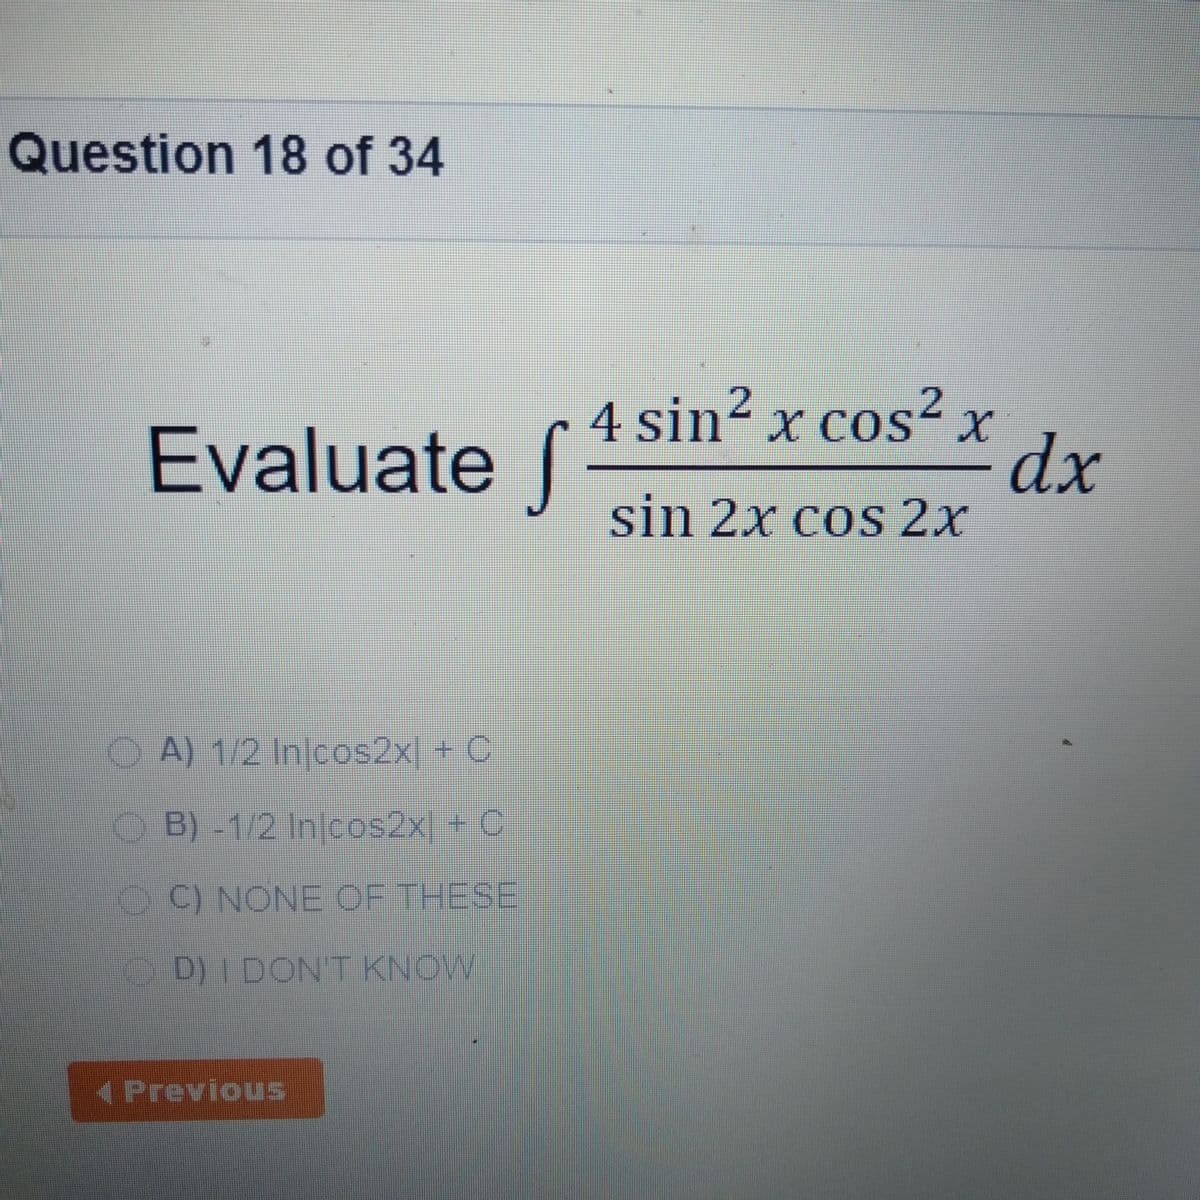 Question 18 of 34
4 sin² x cos²x
2
X COS"
Evaluate ſ
dx
sin 2x cos 2x
O A) 1/2 Injcos2x + C
OB)-1/2 Injcos2x + C
OC) NONE OF THESE
OD)I DONT KNOW
(PreviouS
